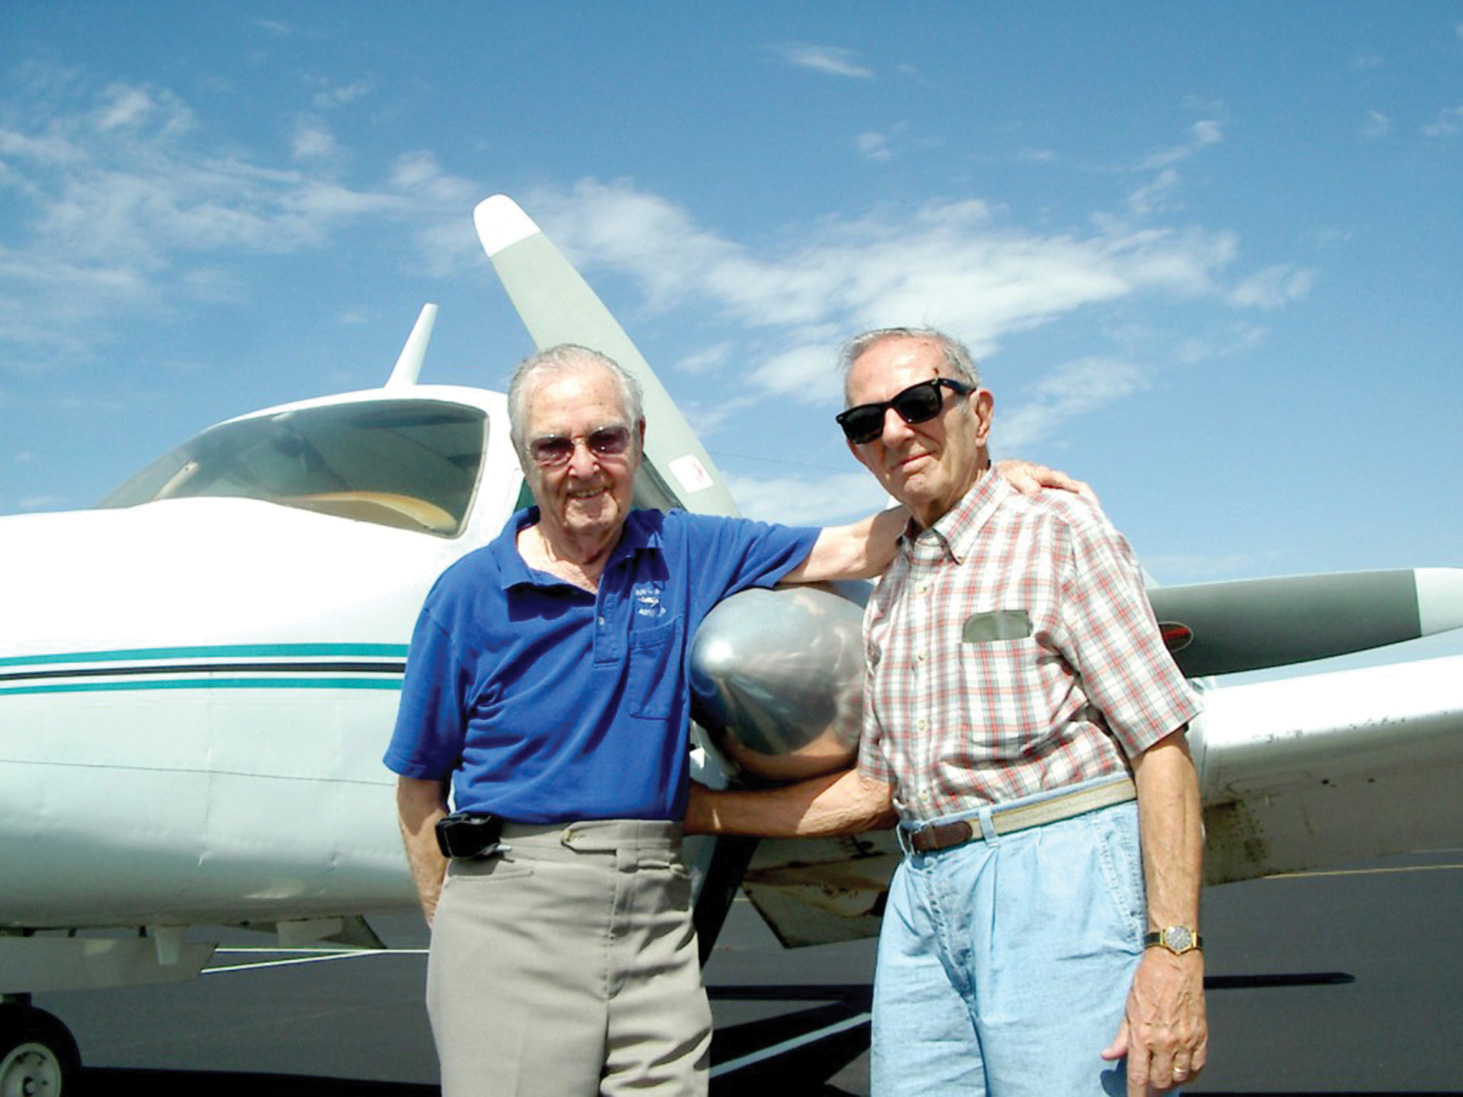 The Sun Lakes Aero Club owes a debt of gratitude to four former Sun Lakes residents who were responsible for forming the club more than 25 years ago. Pictured above in a 2010 photo are two of the co-founders (left to right): Vern Nelson (deceased 2017) and Al Galvi (deceased 2014). Other co-founders were Elton Dyal (deceased 2012) and Sam Doria (deceased 2011). (Photo by Gary Vacin)